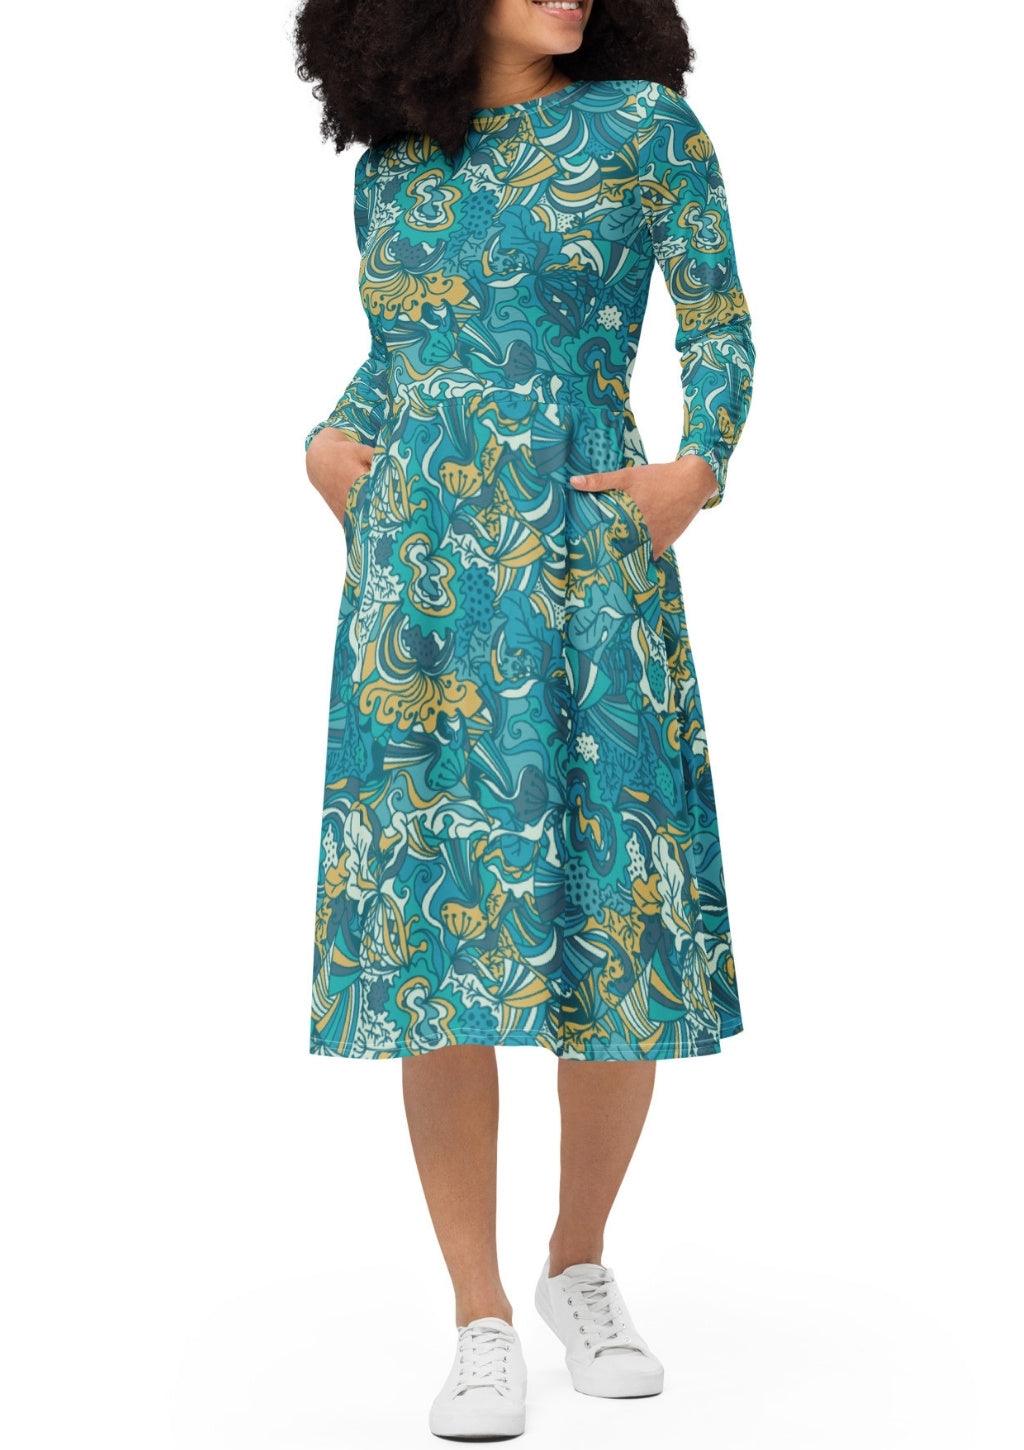 Masu Long Sleeve Midi Fit & Flare Dress - Abstract Paisley Floral  Print - Green Blue Plus Size - Retro - Psychedelic - 70's